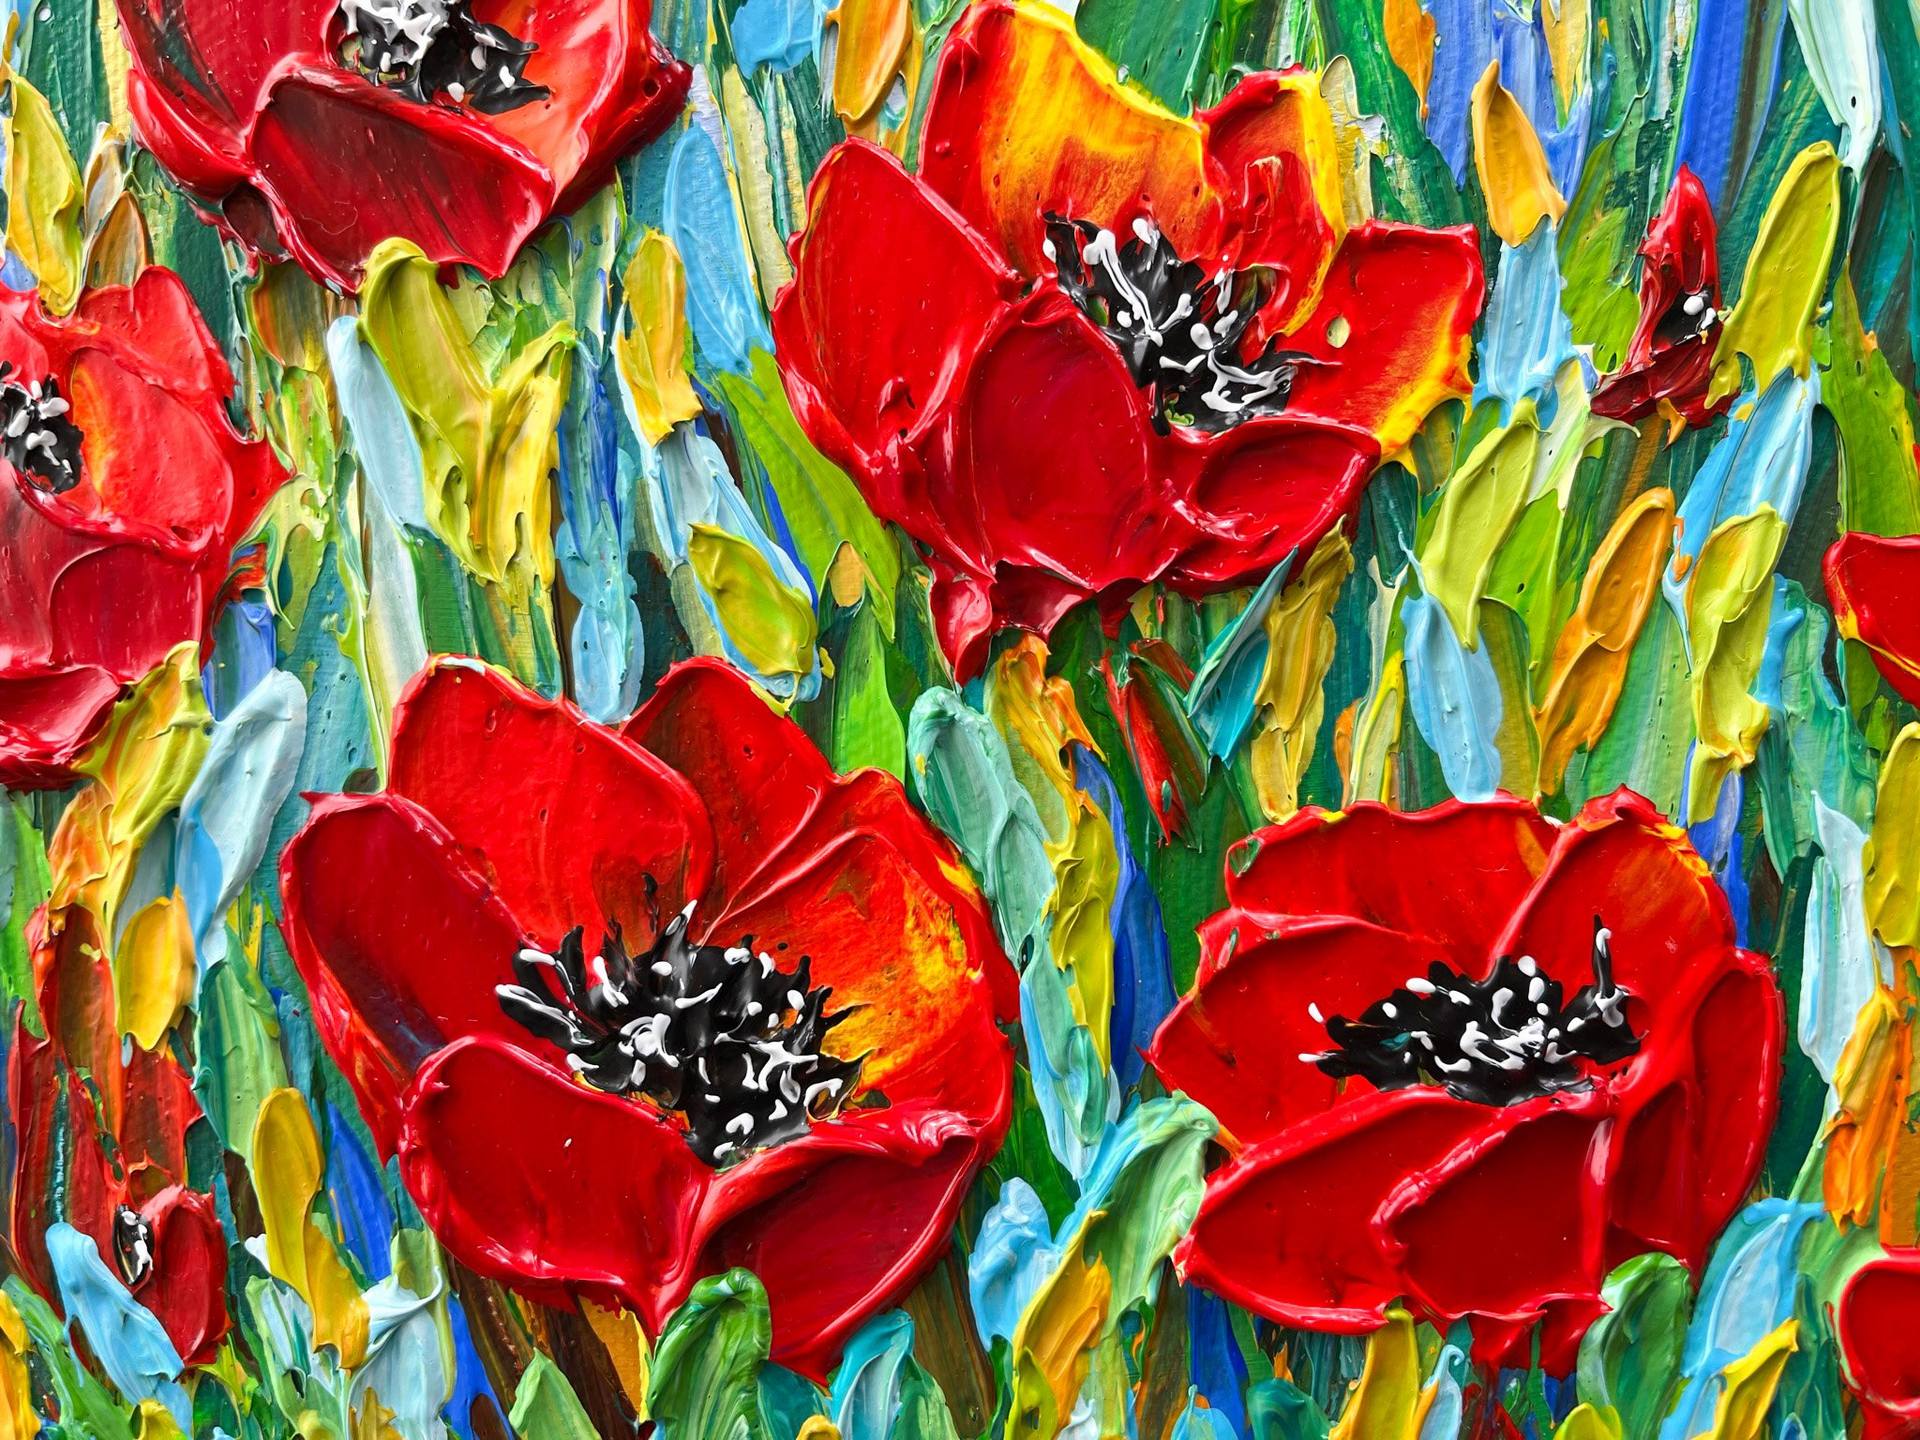 Red Poppies - Original Impasto Floral Painting, Palette Knife Textured Wall  Art Canvas Acrylic painting by Olga Tkachyk